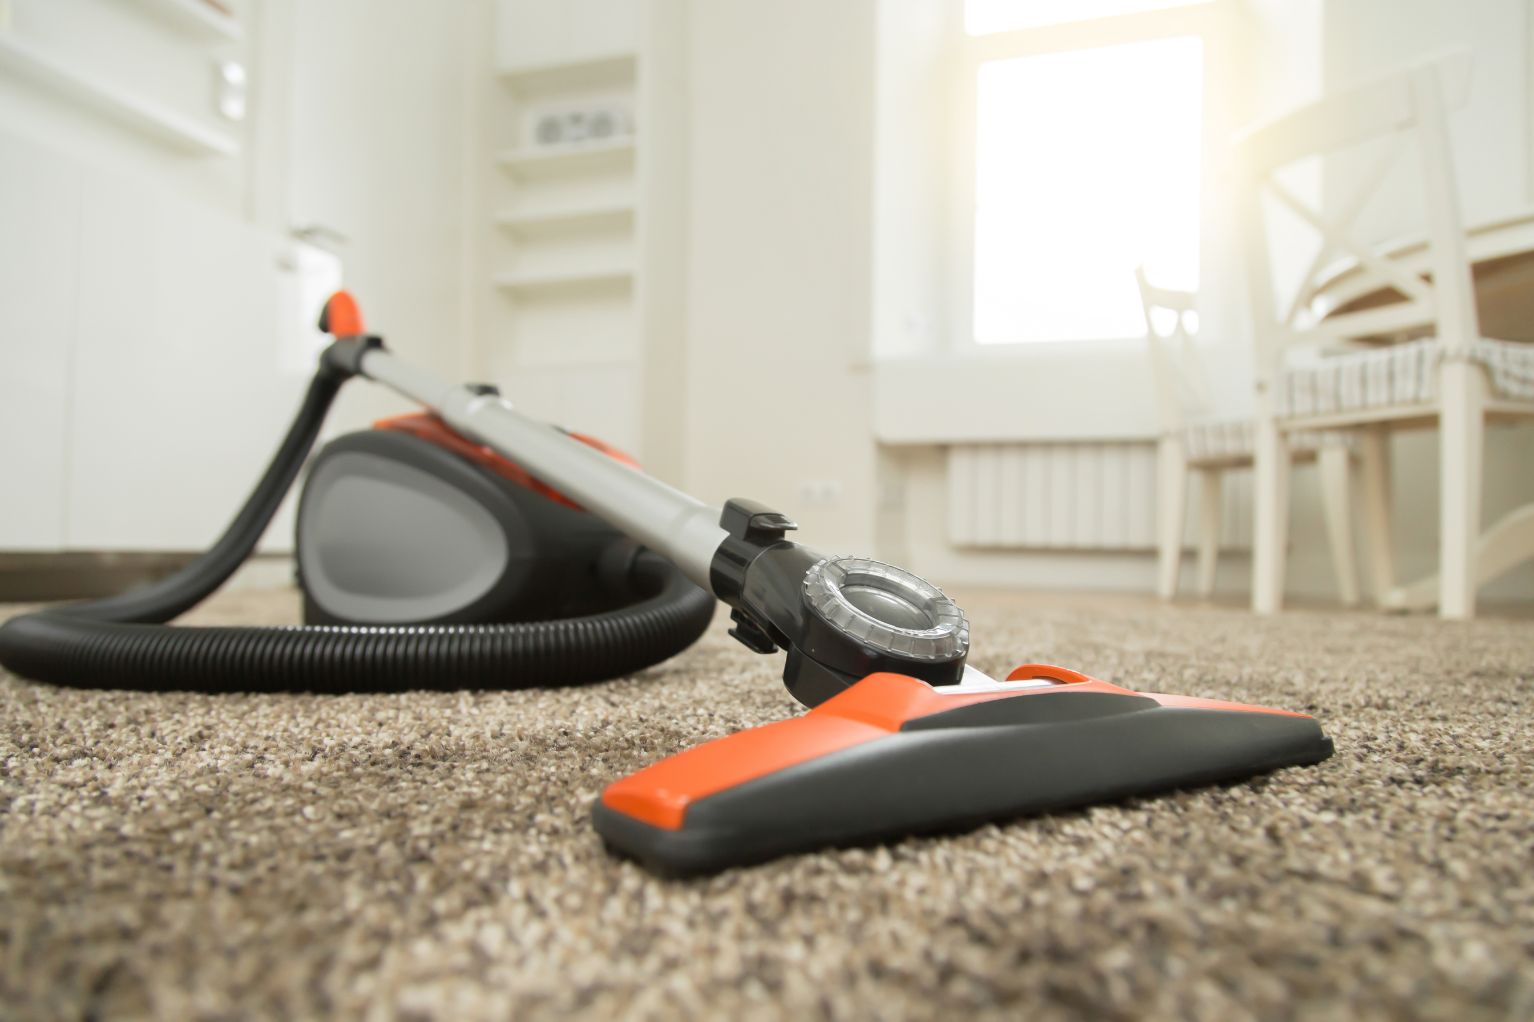 Let’s see some best canister vacuums for carpet and issues around them